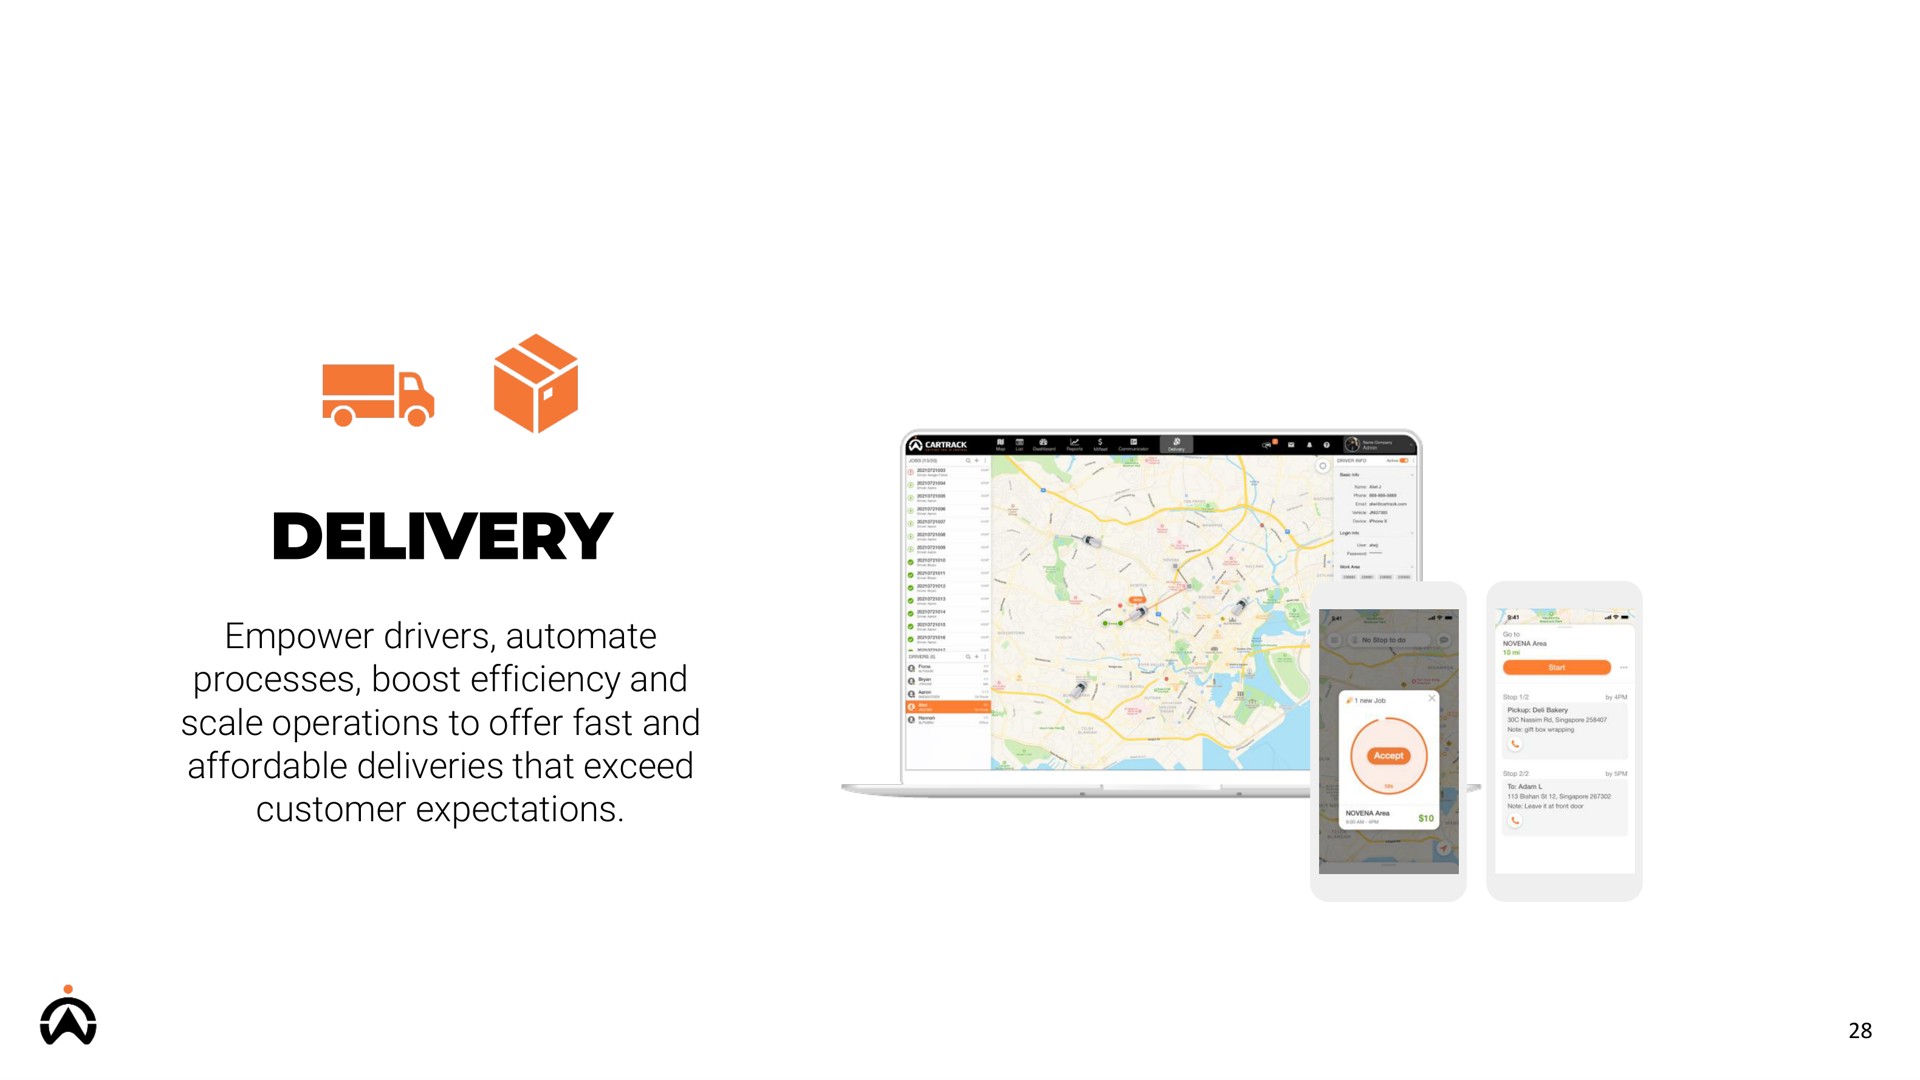 delivery processes boost efficiency and customer expectations | Karooooo